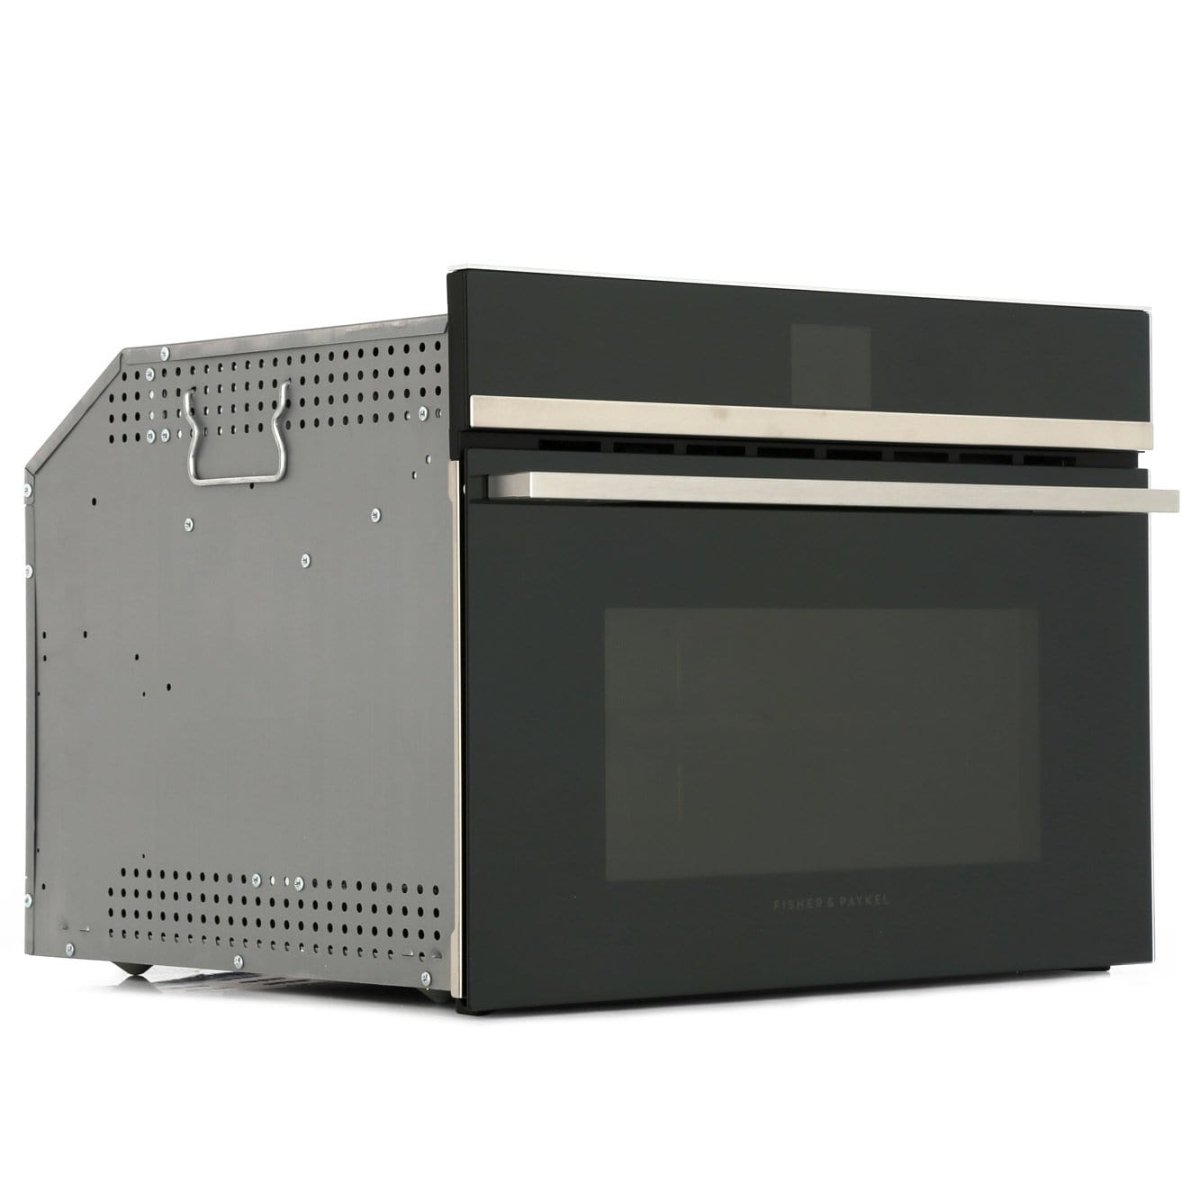 Fisher & Paykel OM60NDB1 37Litre Built in Combination Microwave | Atlantic Electrics